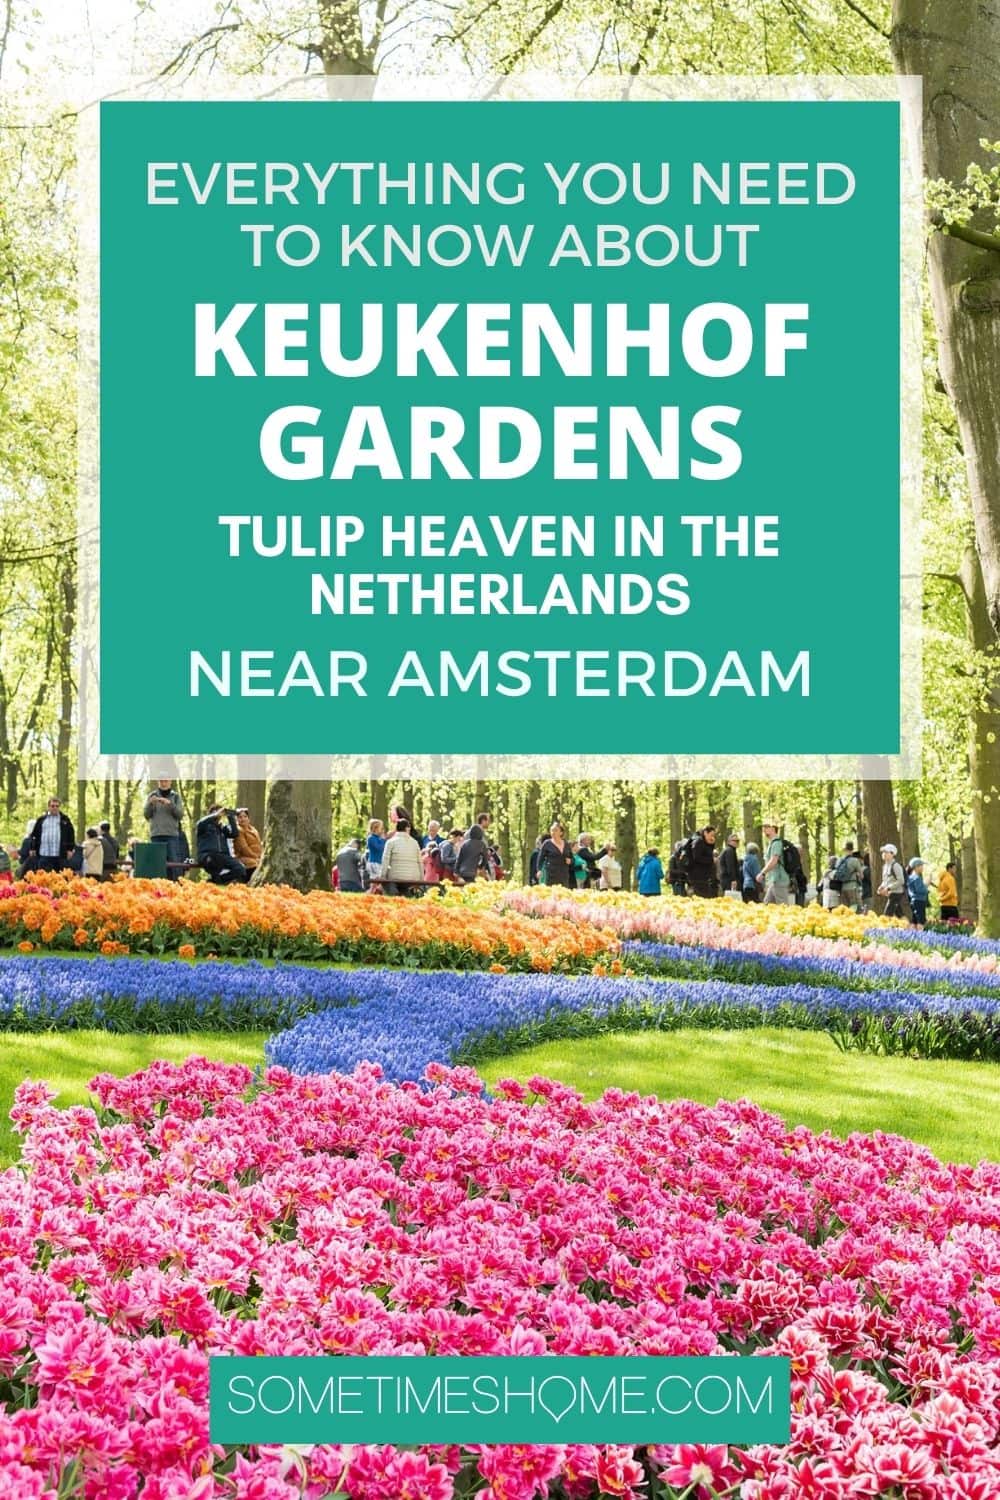 Everything you Need to Know about Keukenhof Gardens - Tulip Heaven in The Netherlands near Amsterdam.